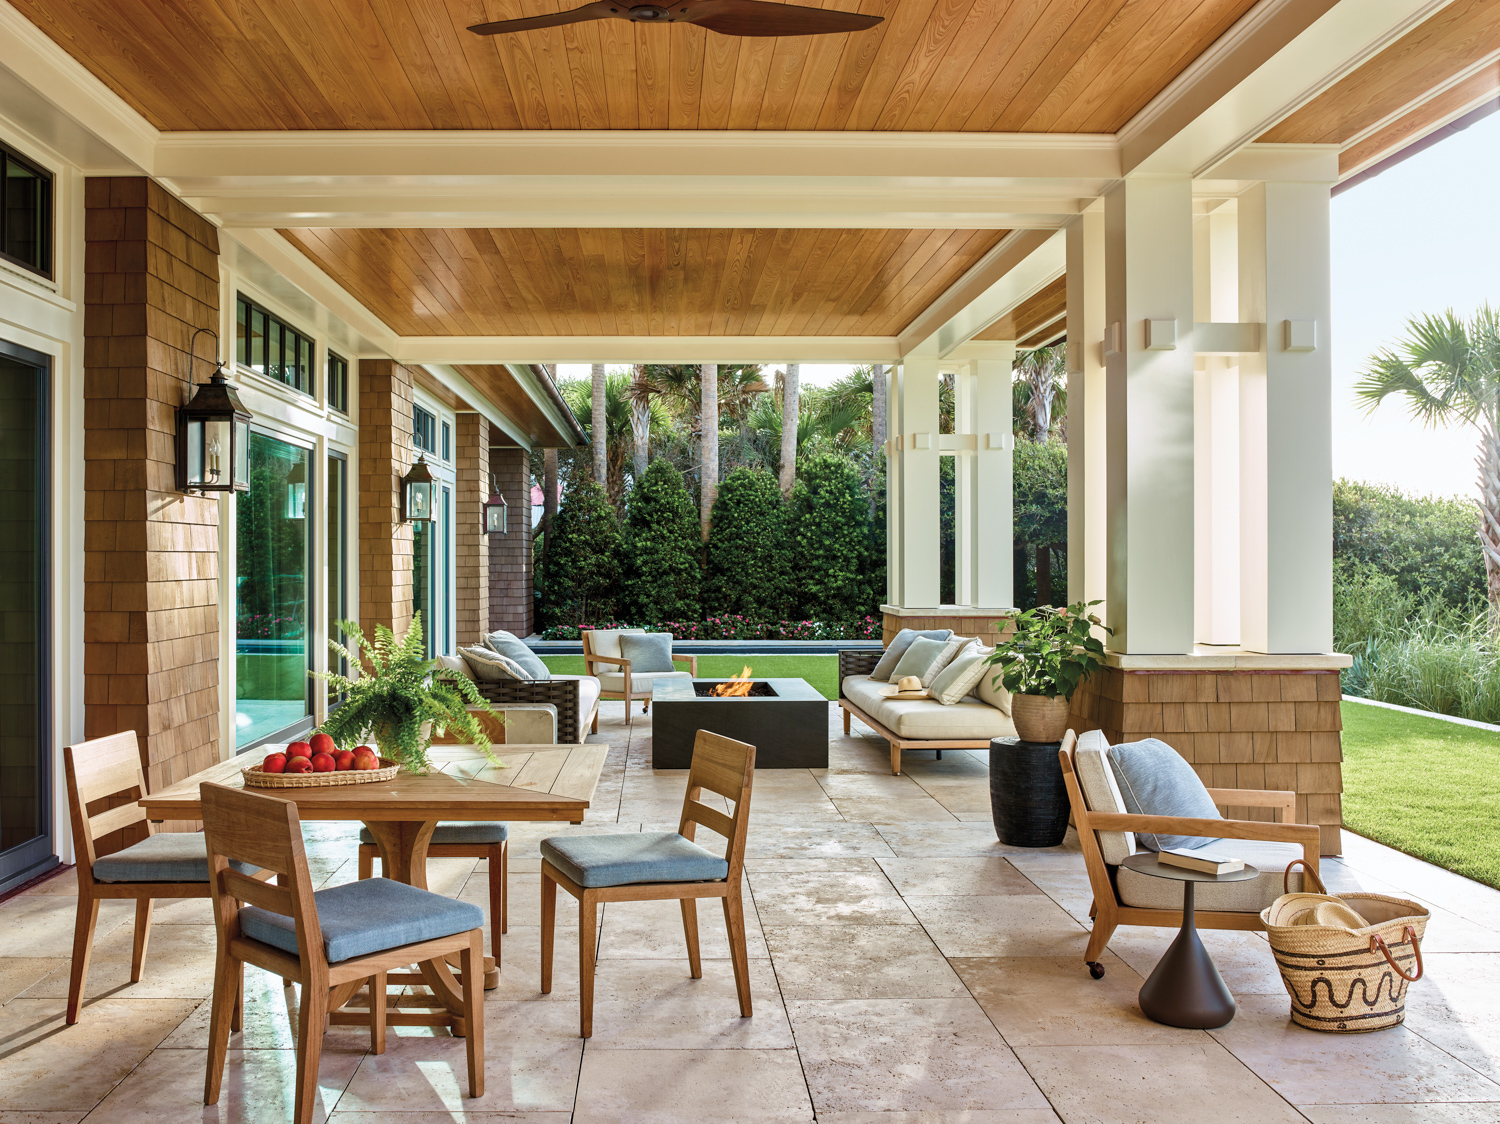 Covered patio featuring a wooden...